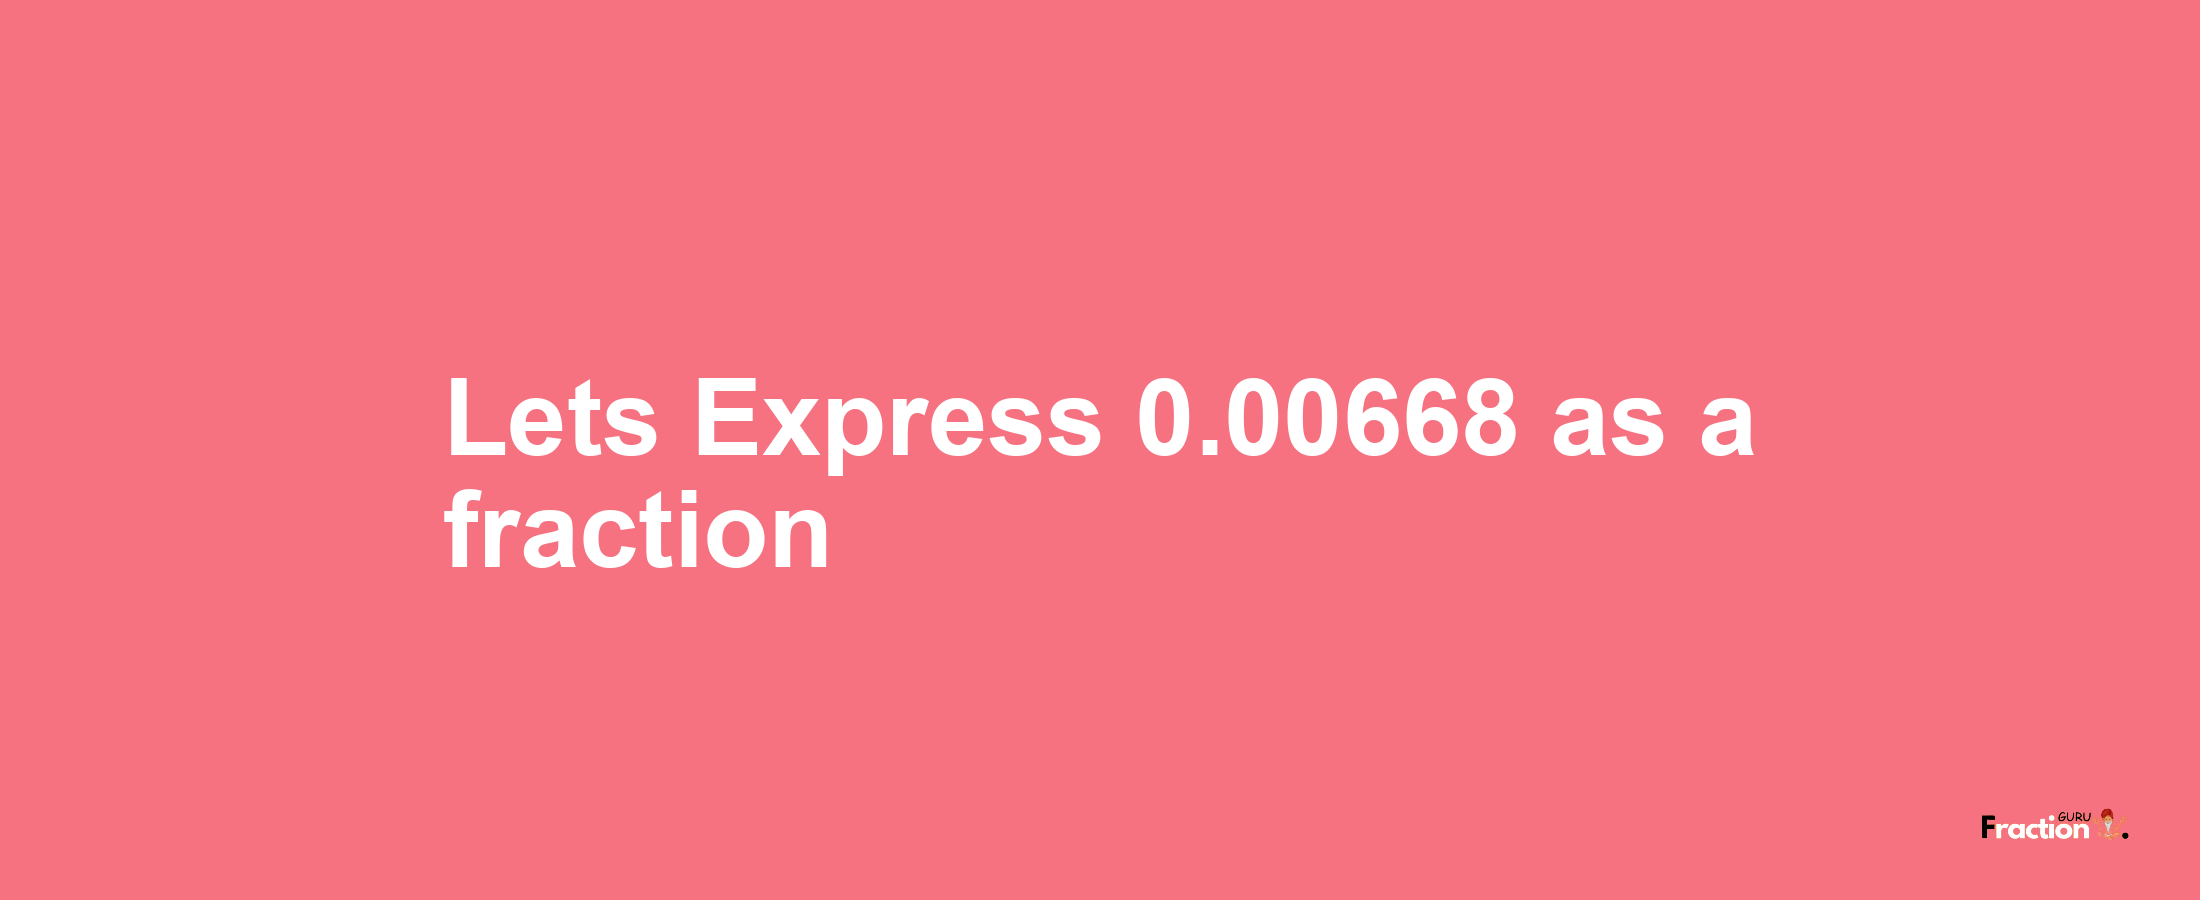 Lets Express 0.00668 as afraction